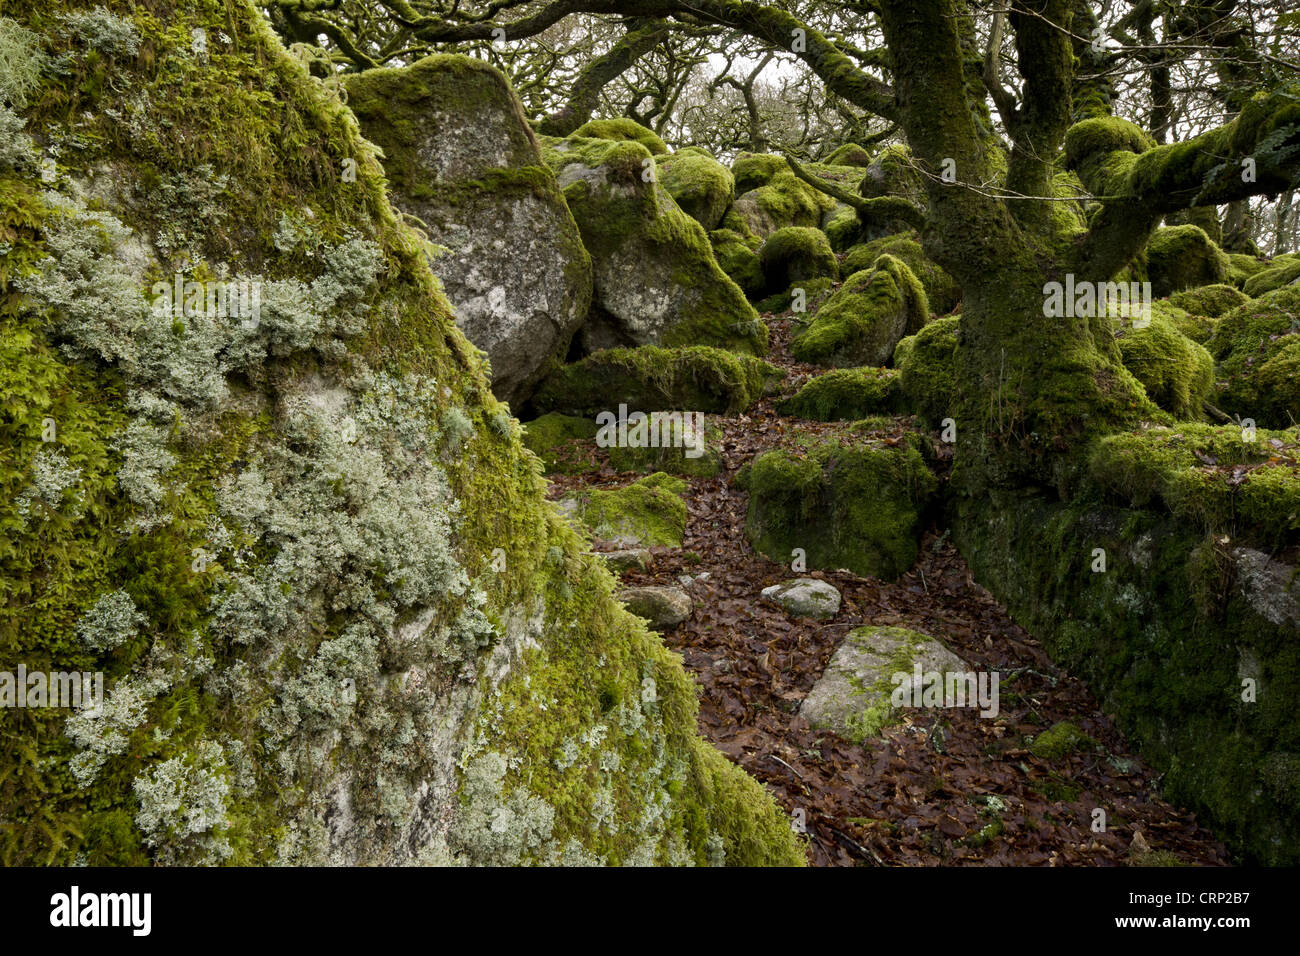 Ancient stunted Common Oak (Quercus sp.) trees growing amongst moss covered boulders in moorland copse habitat, Black-a-Tor Stock Photo